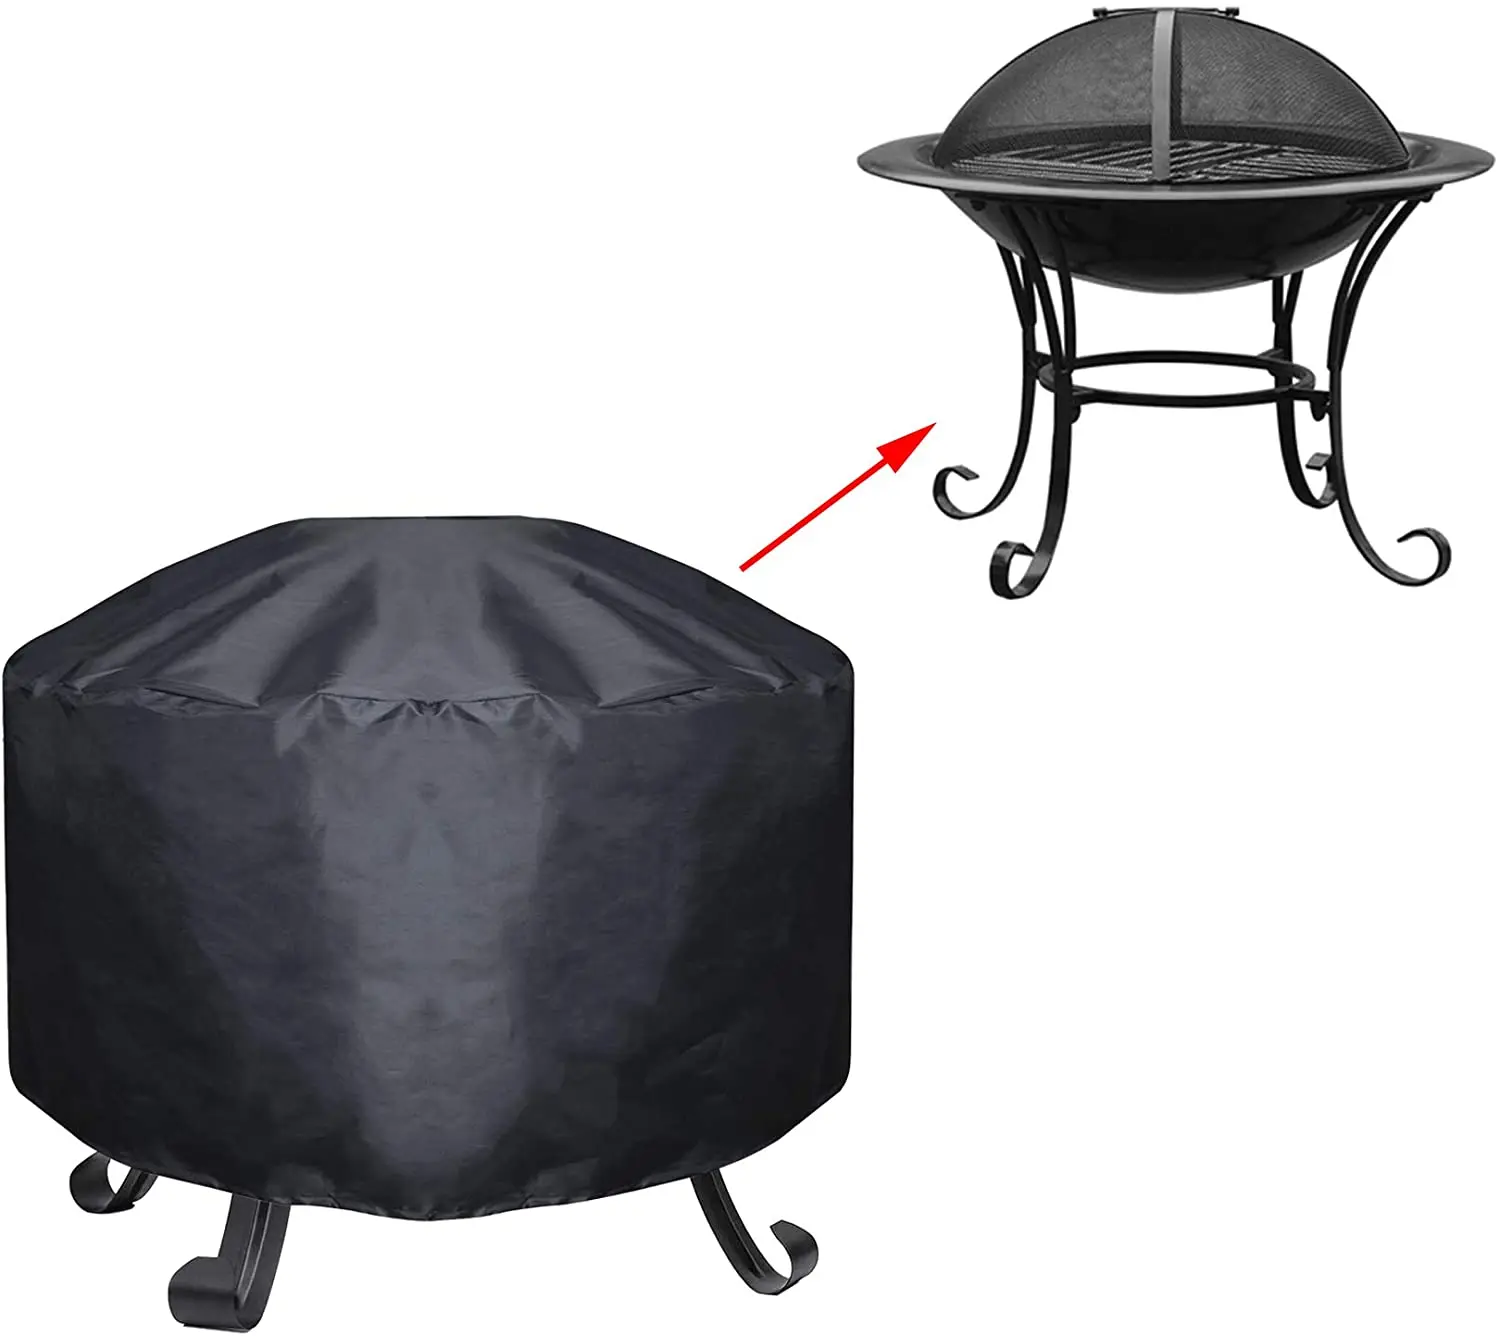 

Outdoors Round Fire Pit Covers, Waterproof, Dustproof Oxford Heavy Duty Gas Fire pit Patio Furniture Table Covers, Black